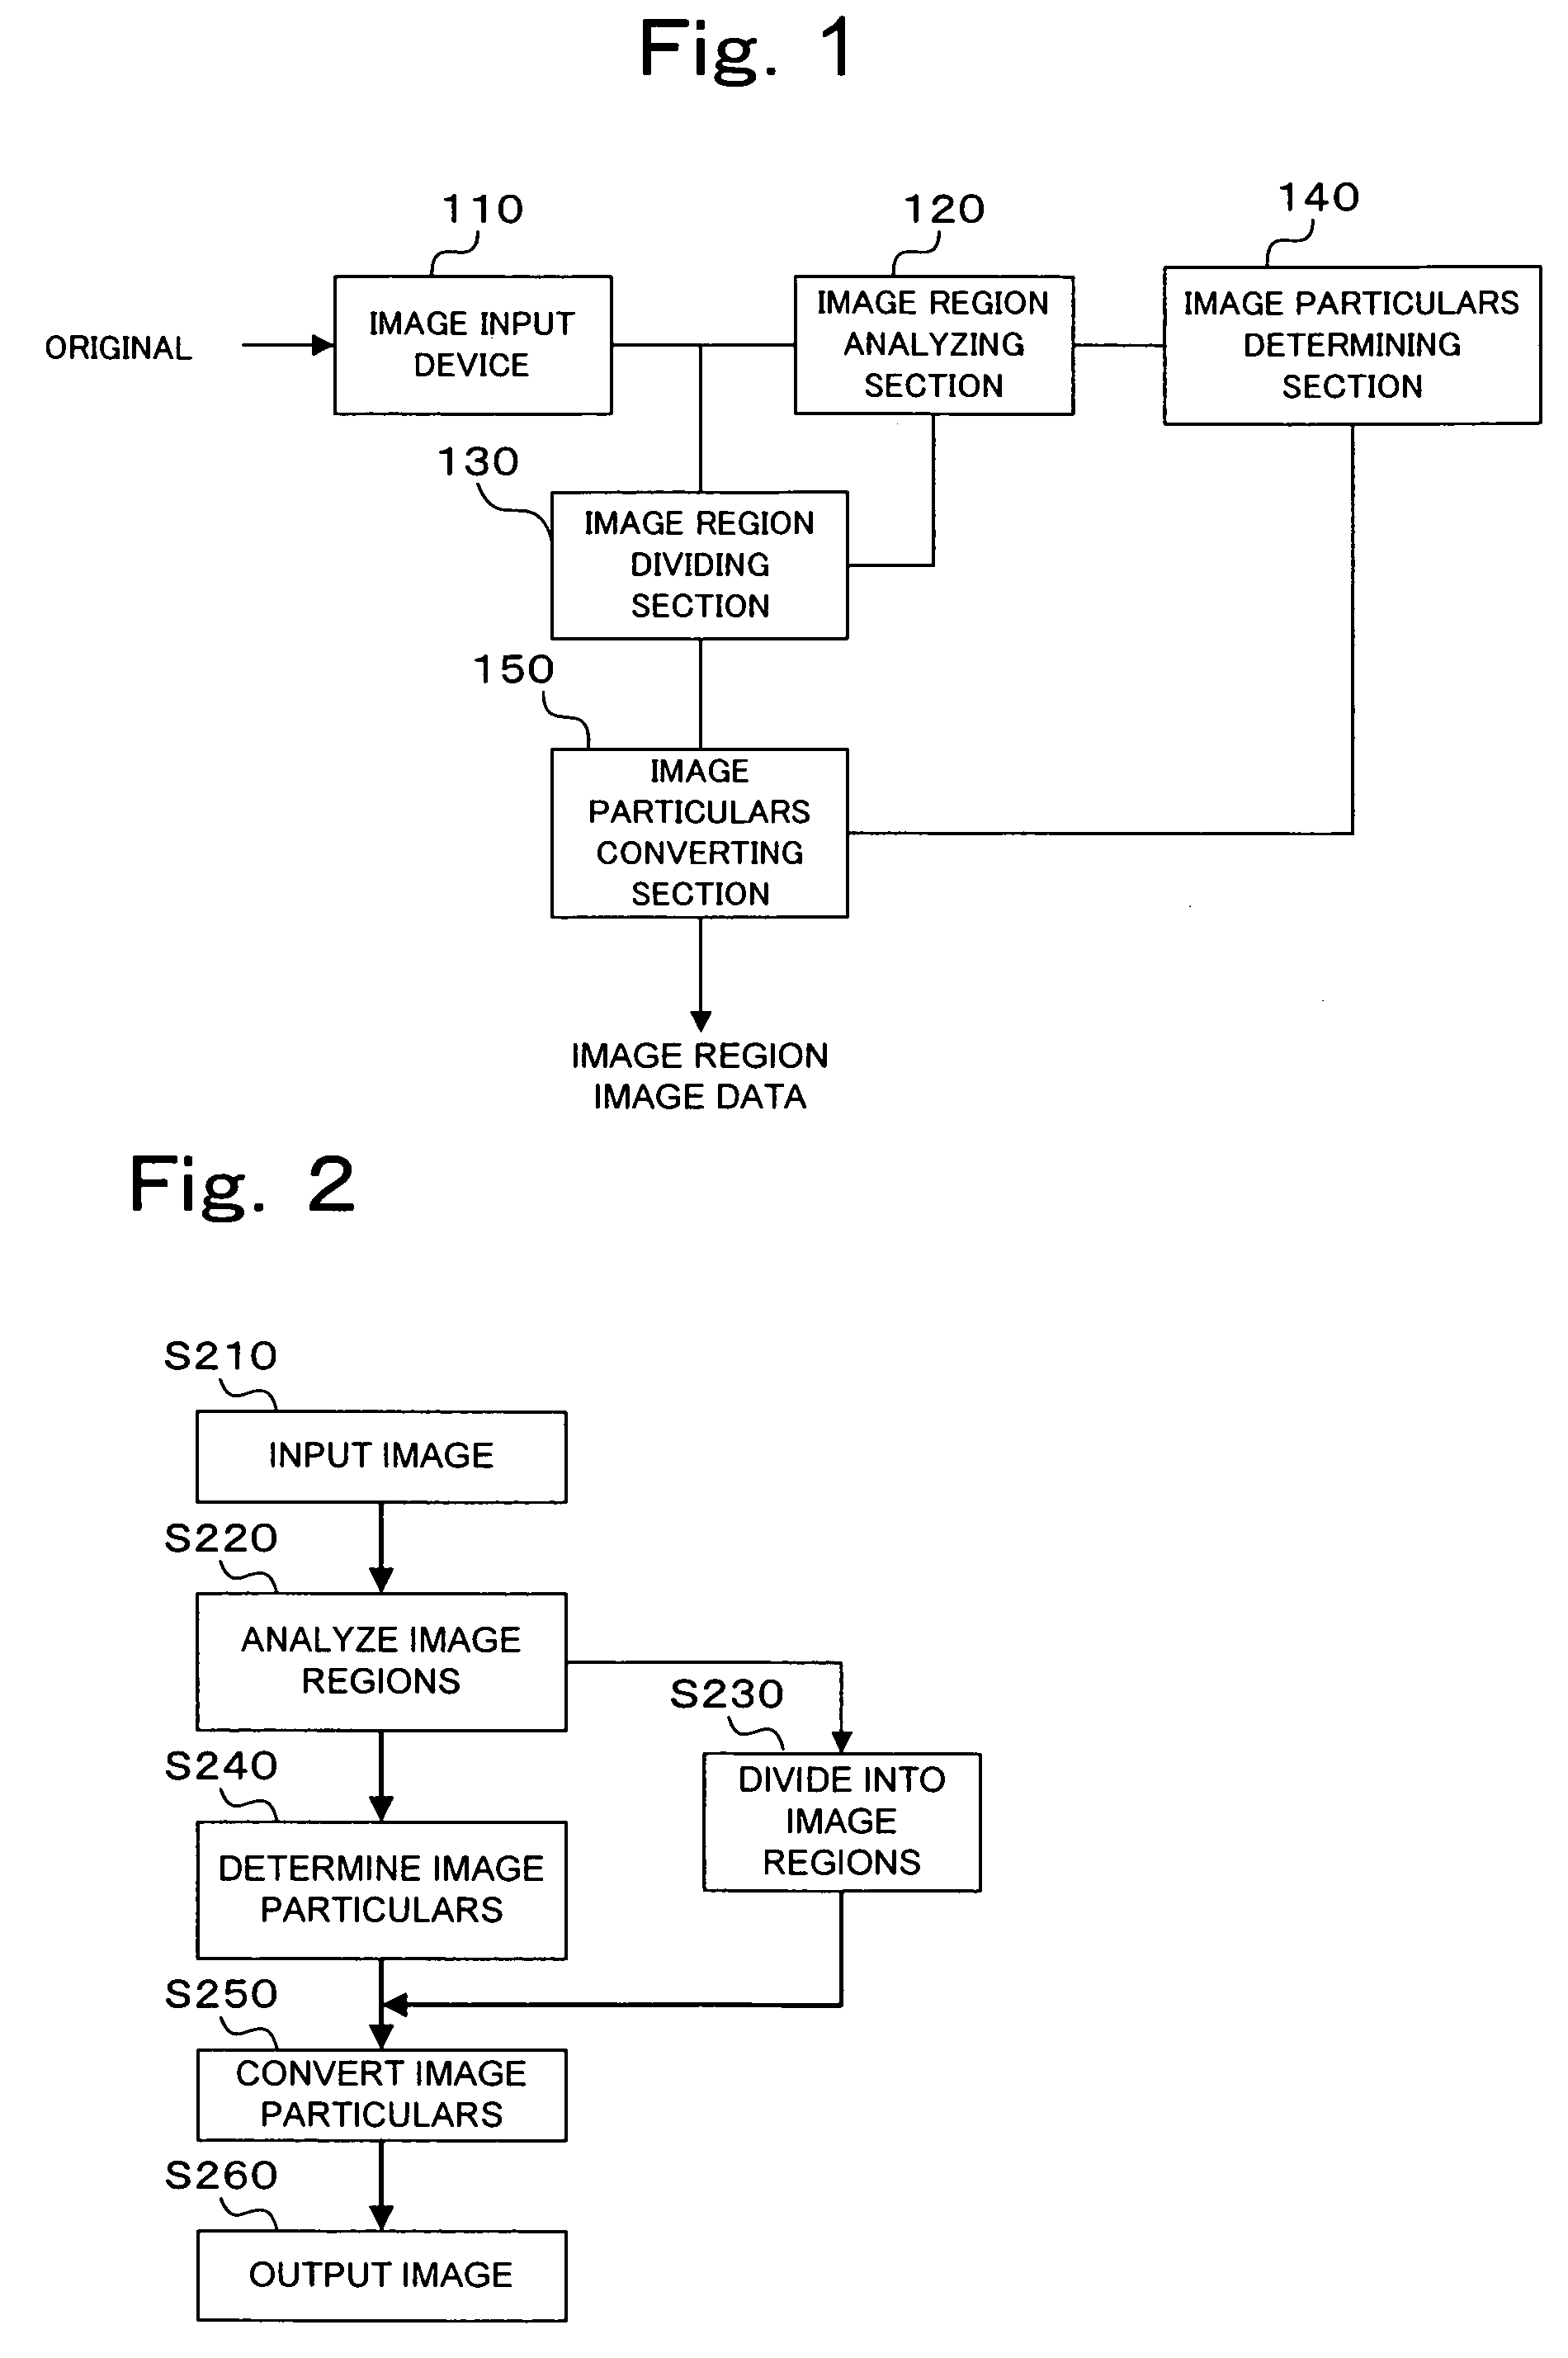 Image processing apparatus and method for dividing an image into component images